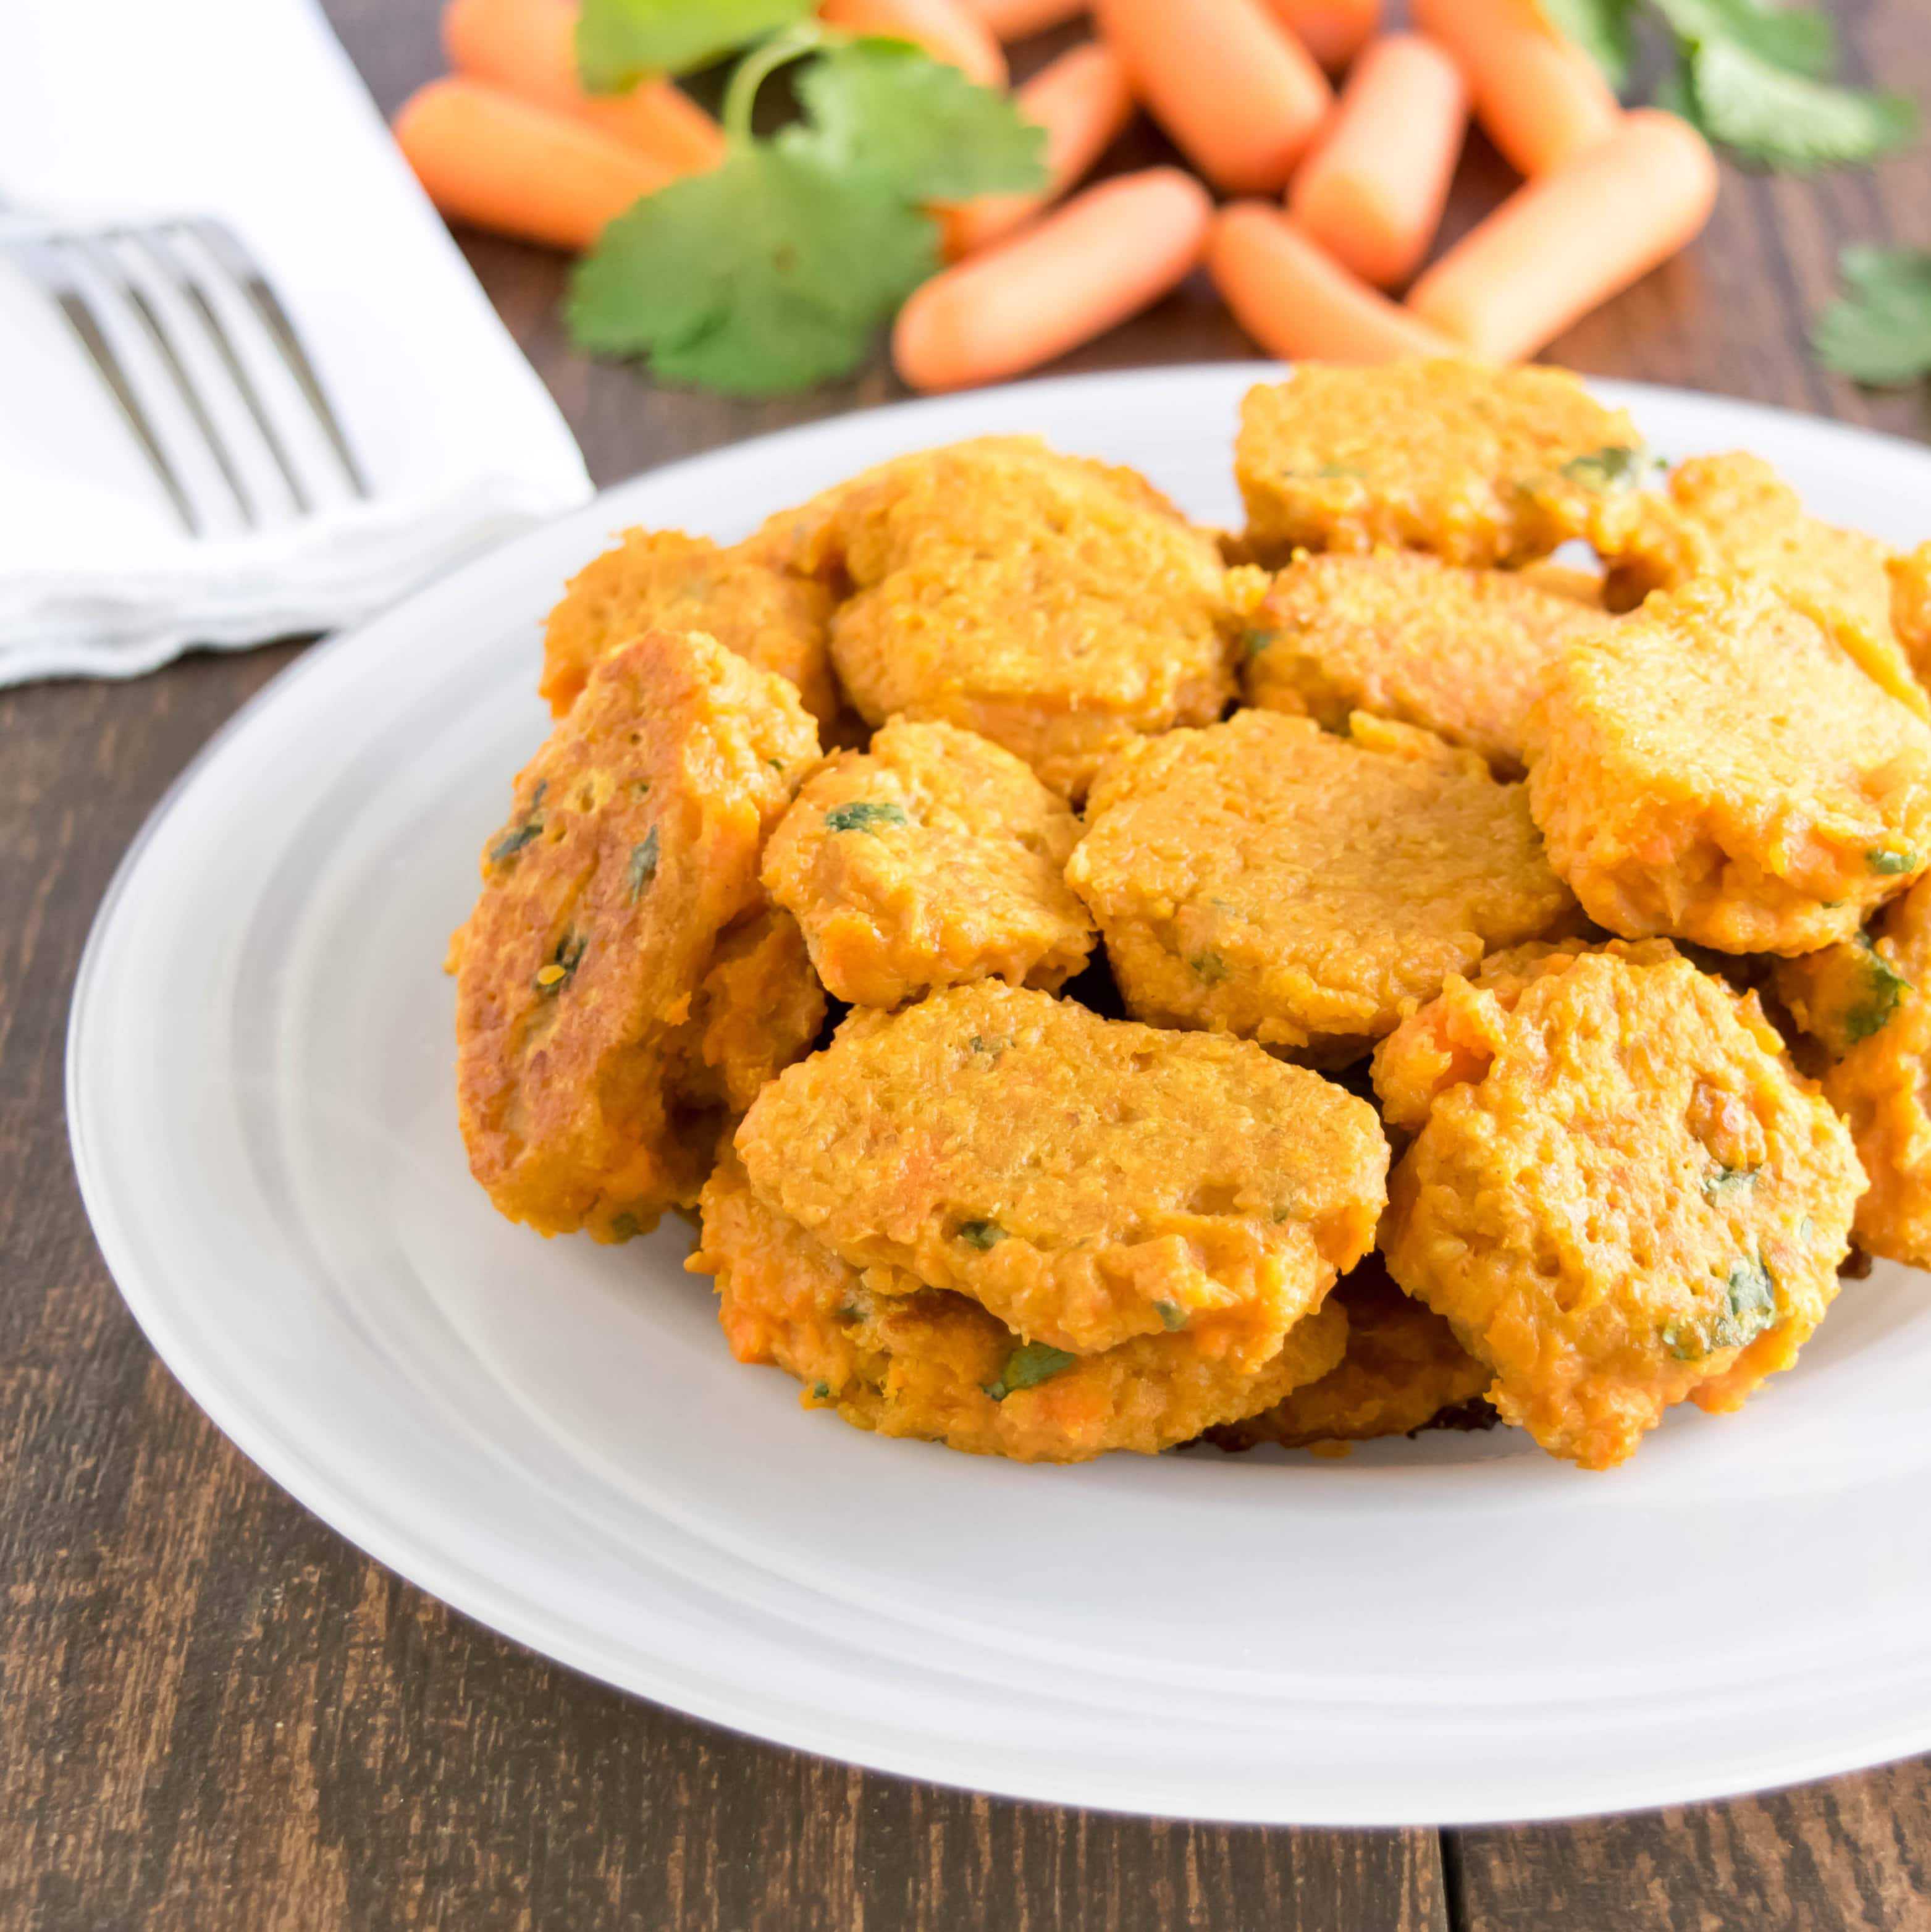 A plate full of healthy carrot fritters, made with carrots and vegetables and served on a white ceramic plate.